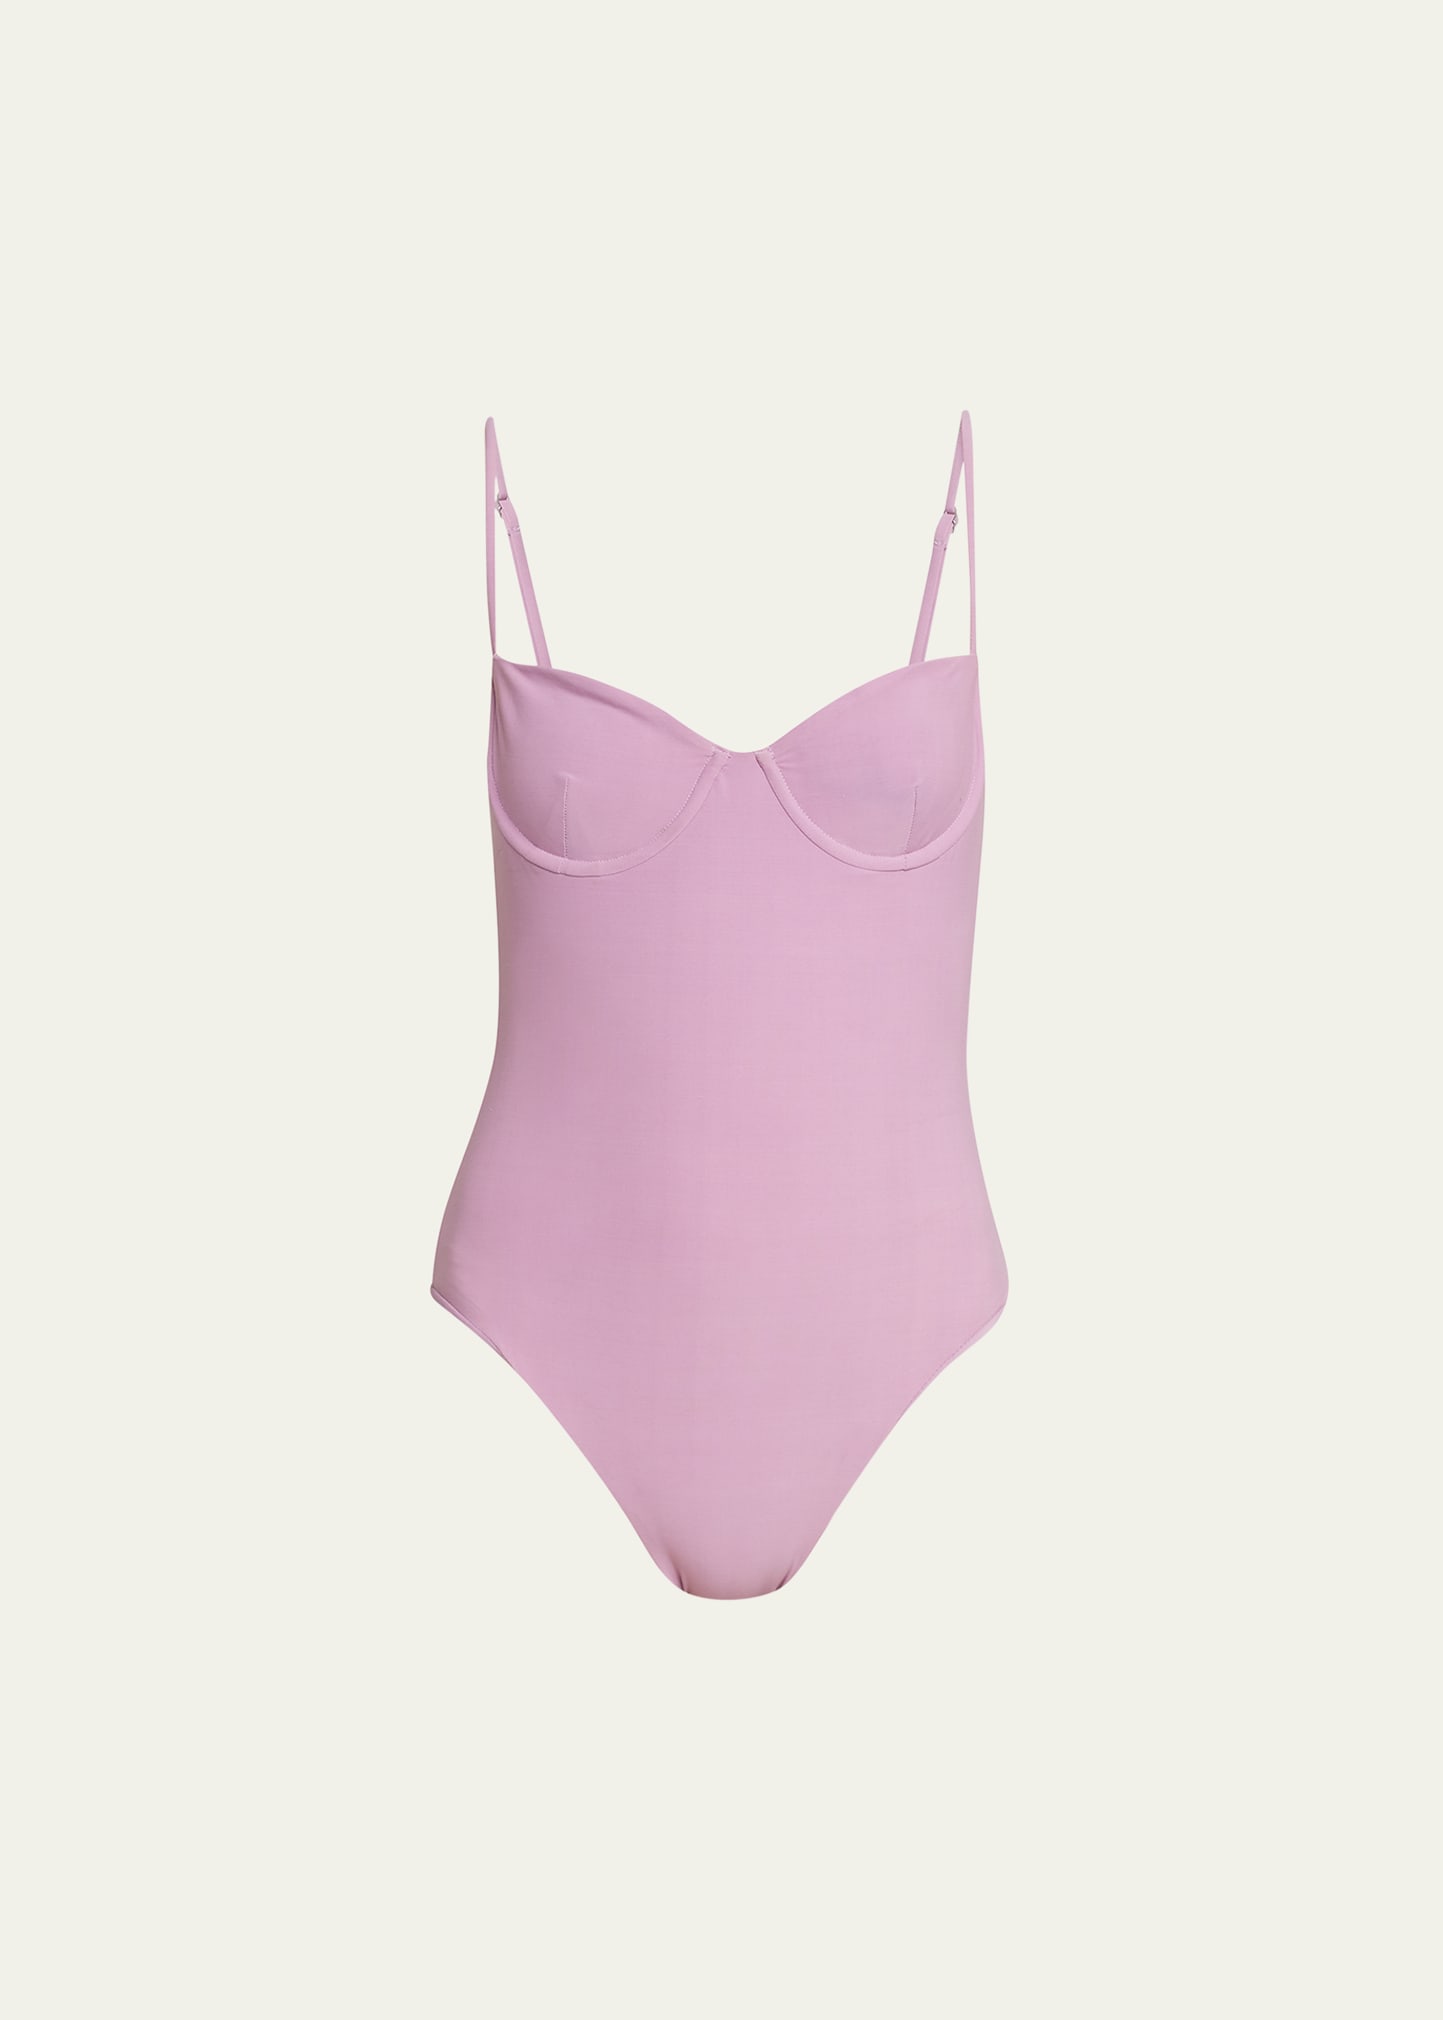 The Balconette Underwire One-Piece Swimsuit